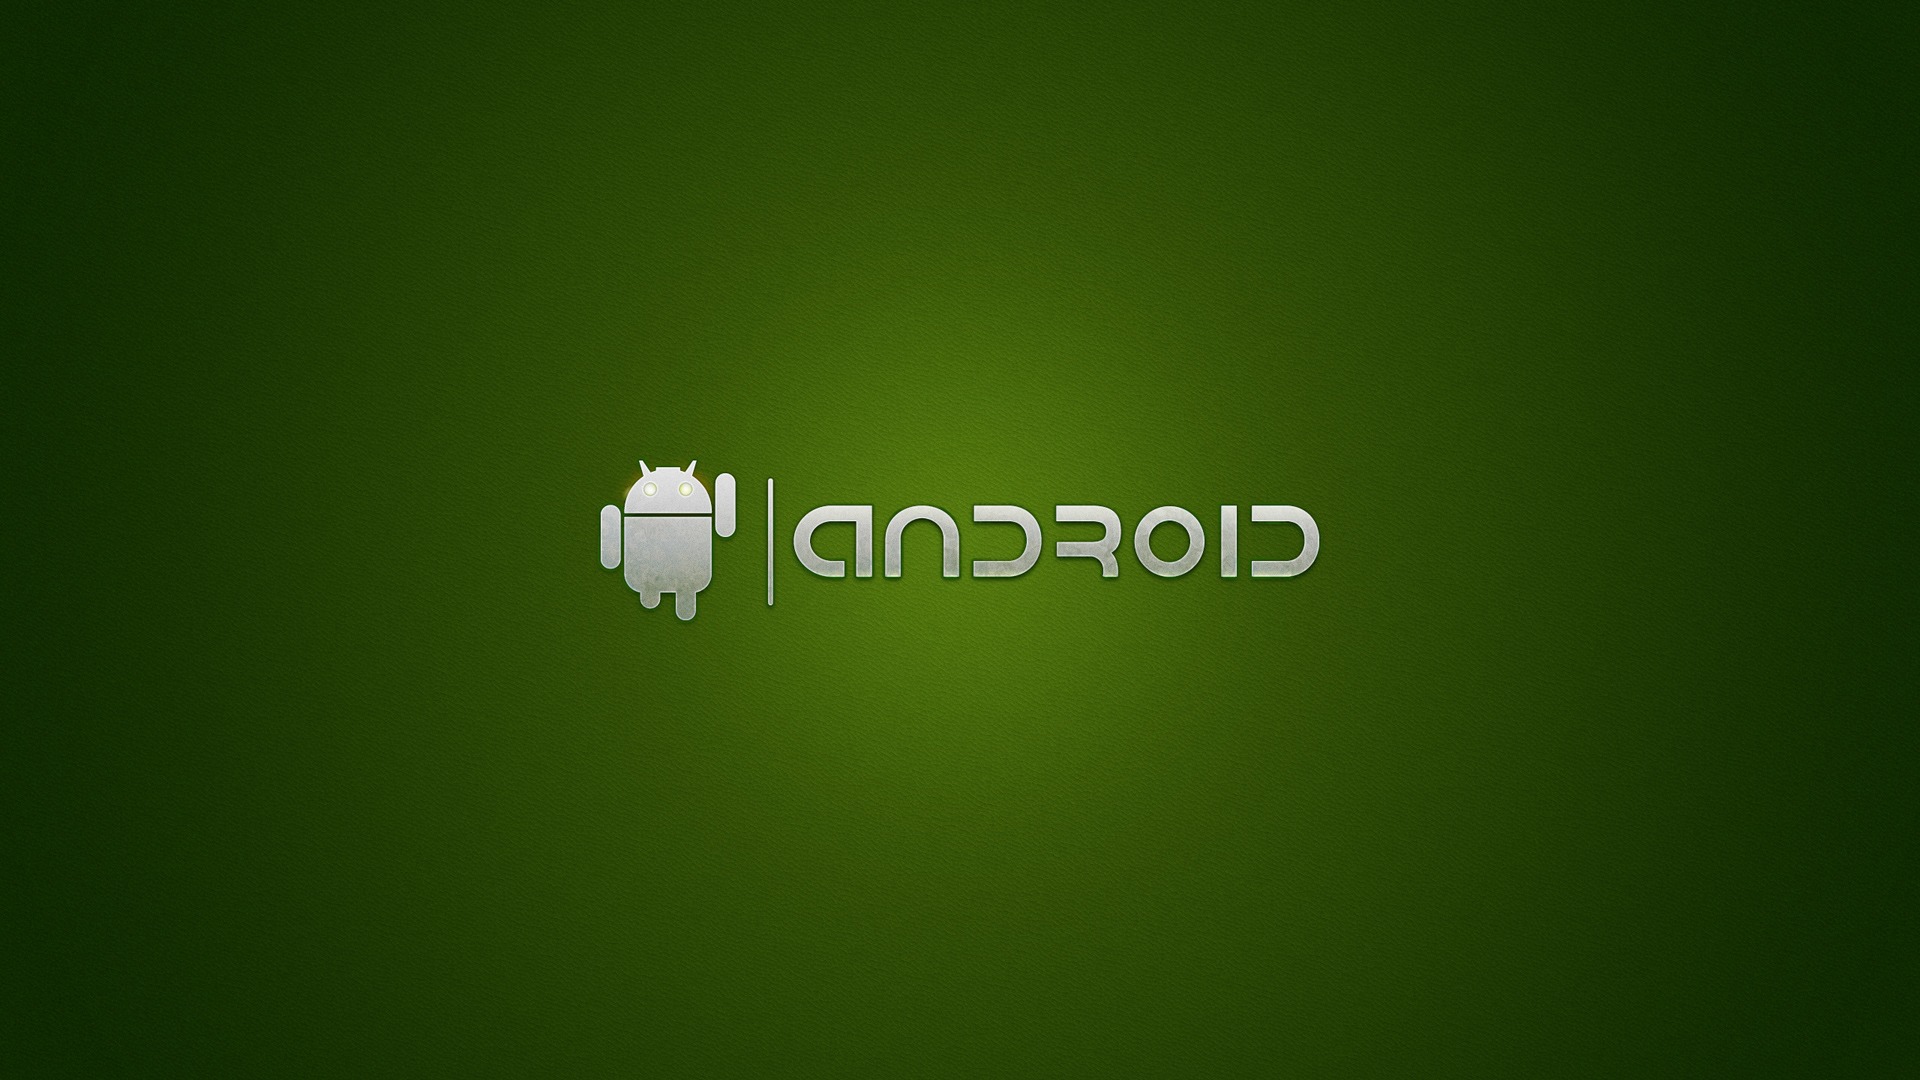 High Quality Android Wallpaper Desktop